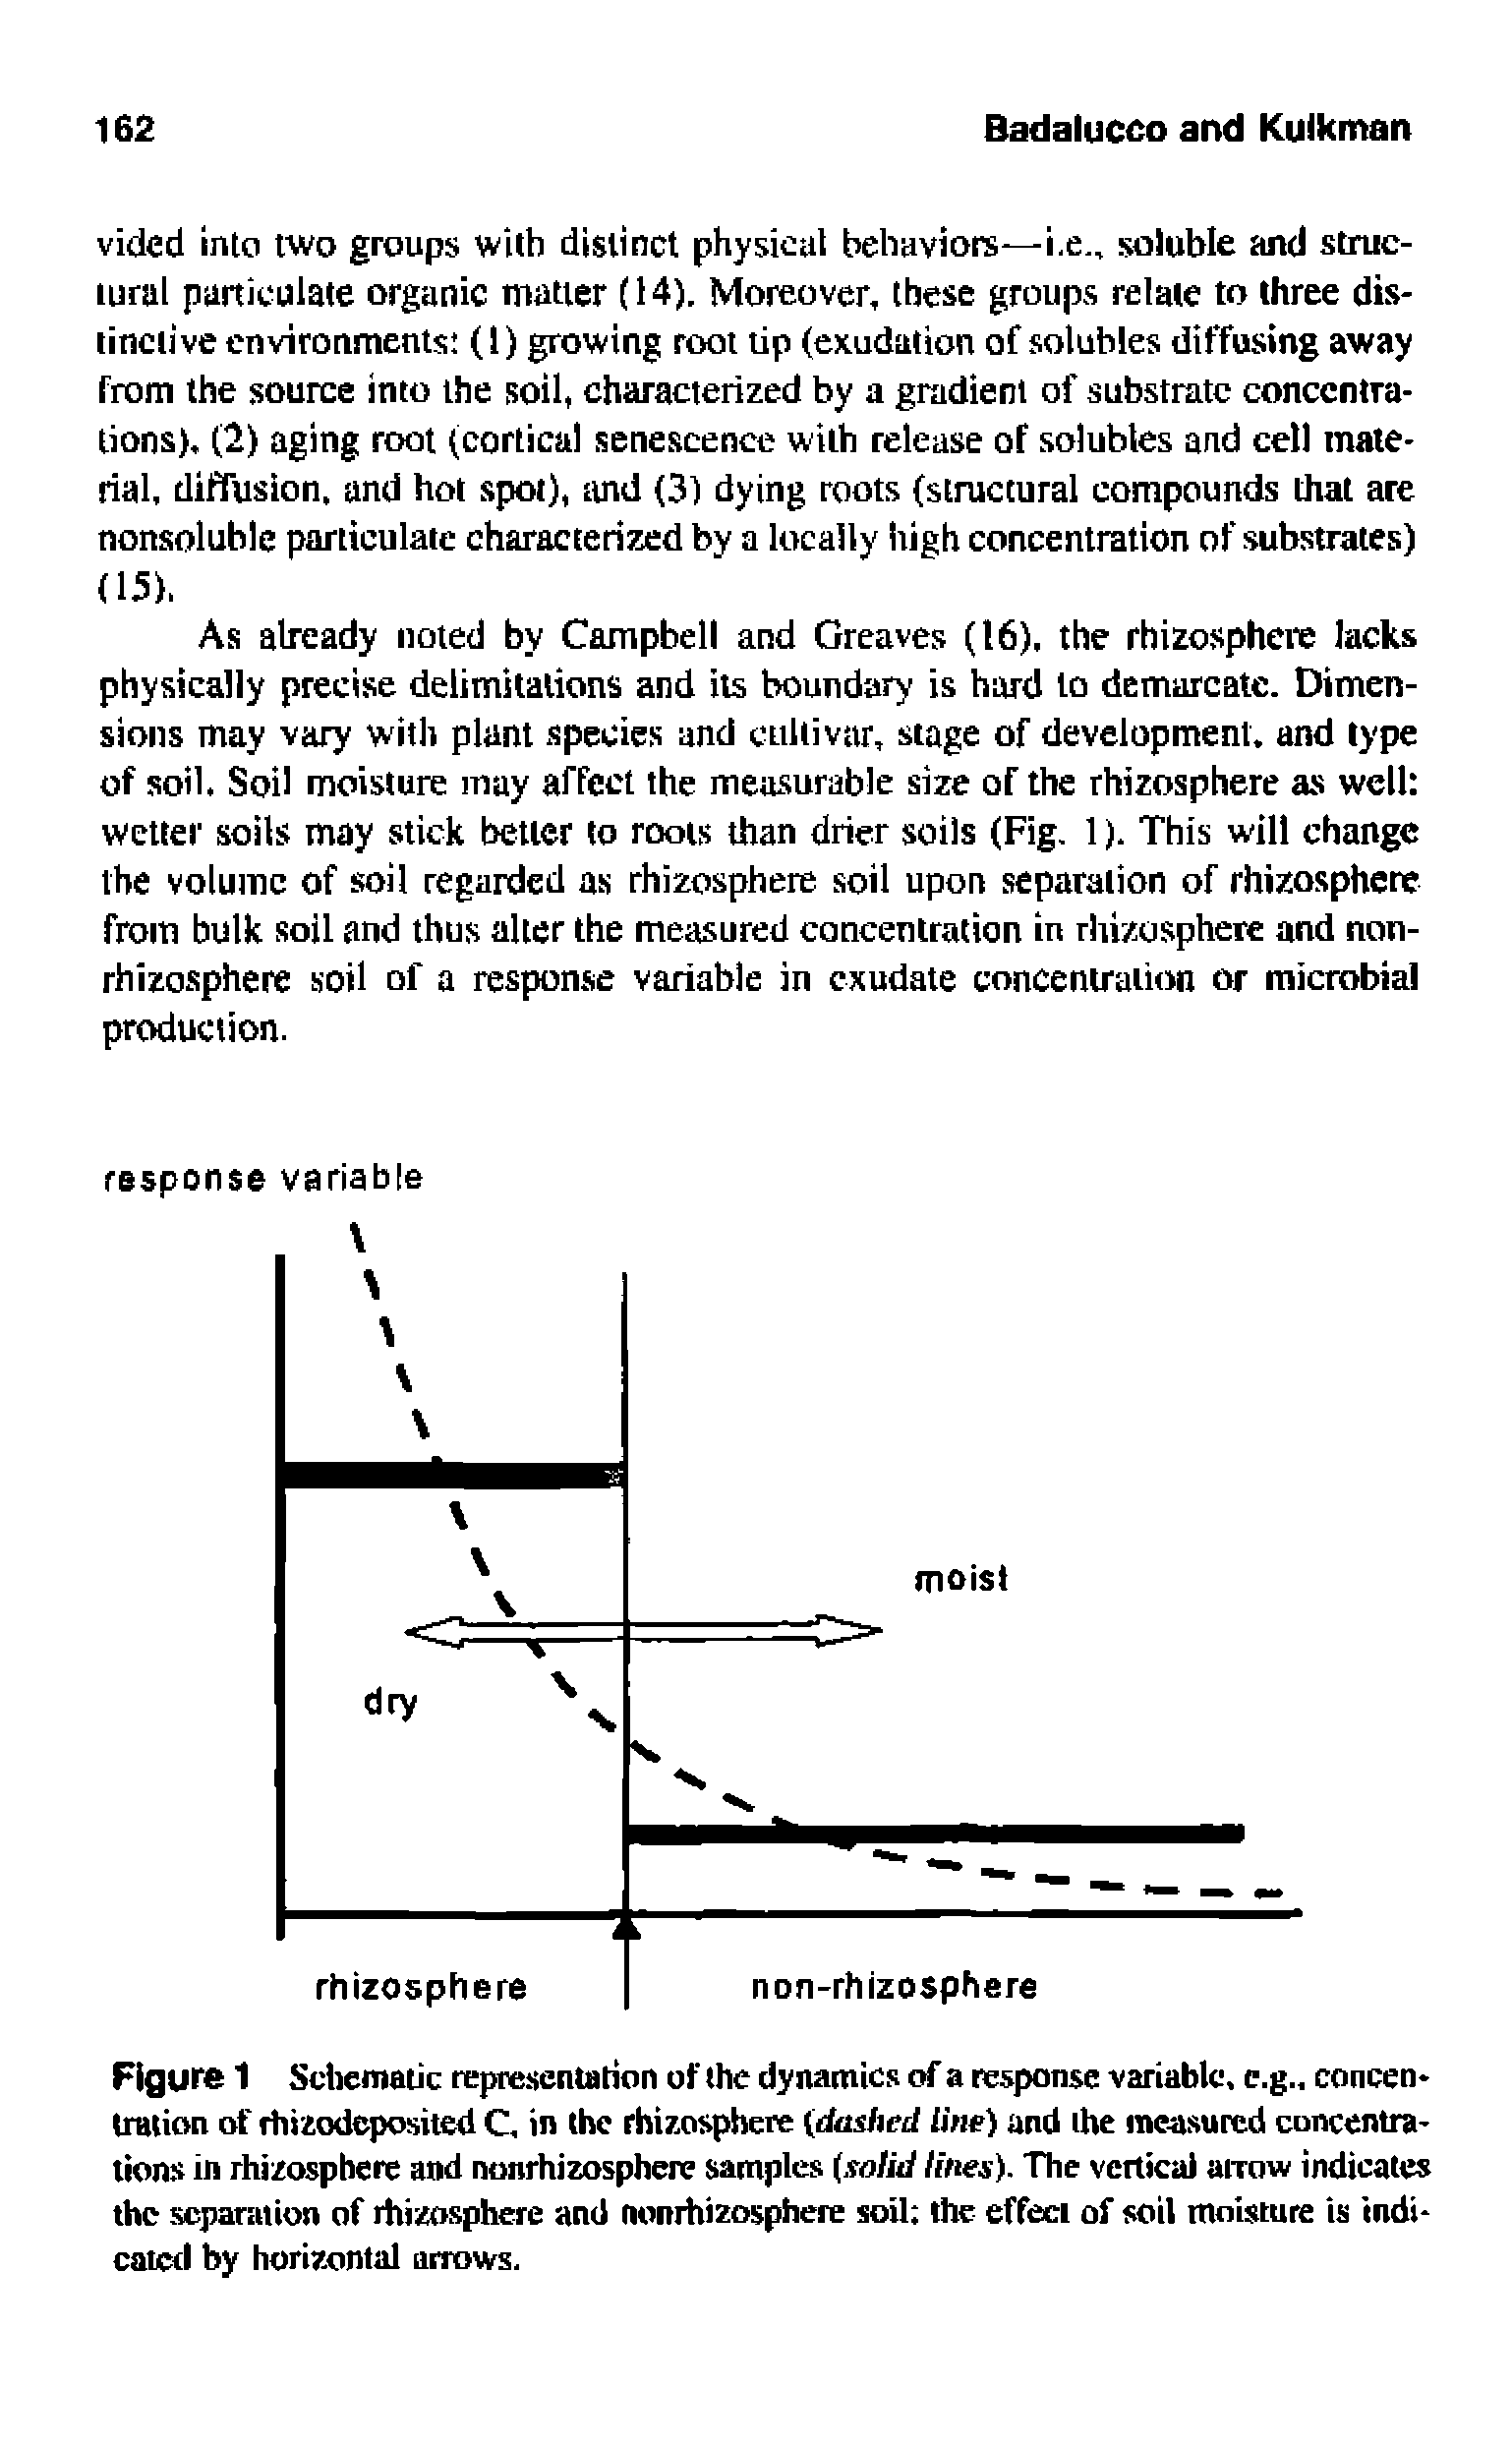 Figure 1 Scbematic representation of the dynamics rf a response variable, c.g., concentration of rbizodeposited C, in the rhizosphere (das/ied line) and ihe measured concentrations in rhizosphere and nonrhizosphere samples solid lines). The vertical airow indicates the separation of rhizosphere and nonrhizosphere soil the effect of soil moisture is indicated by horizontal arrows.